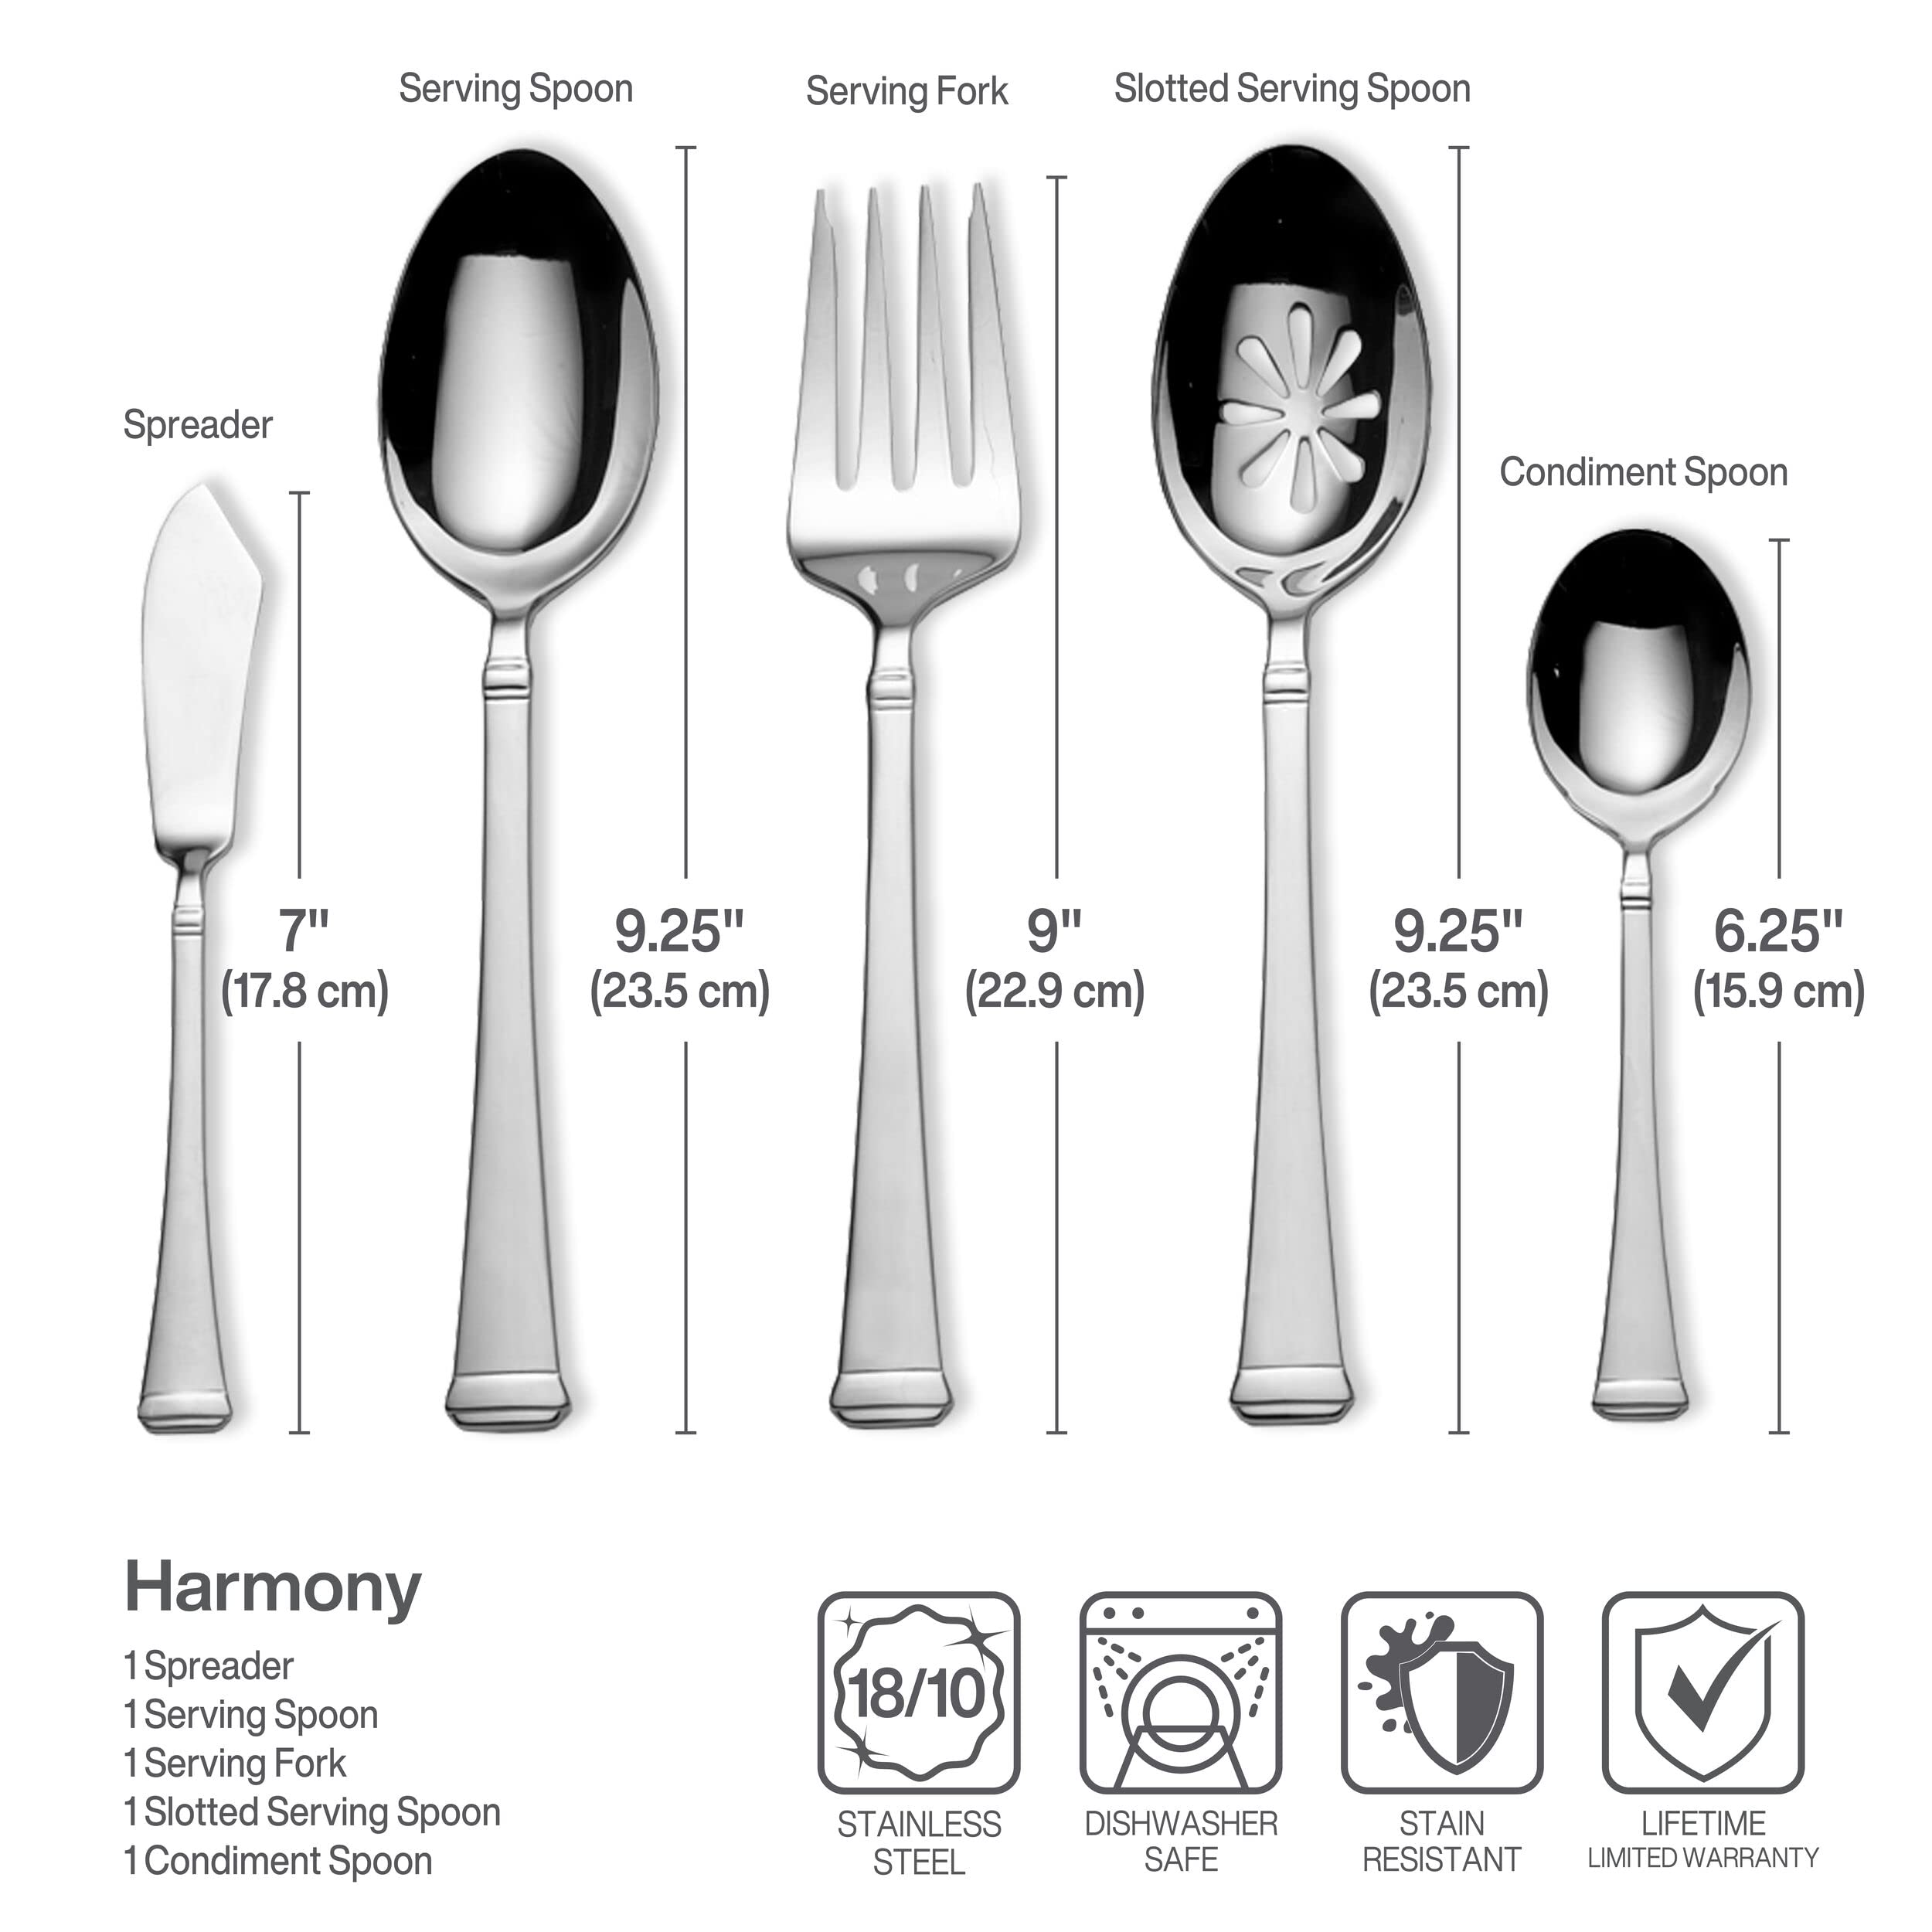 Mikasa Harmony 65 Piece Silverware Set, 18.10 Polished Mirror Stainless Steel, Service for 12 with Set